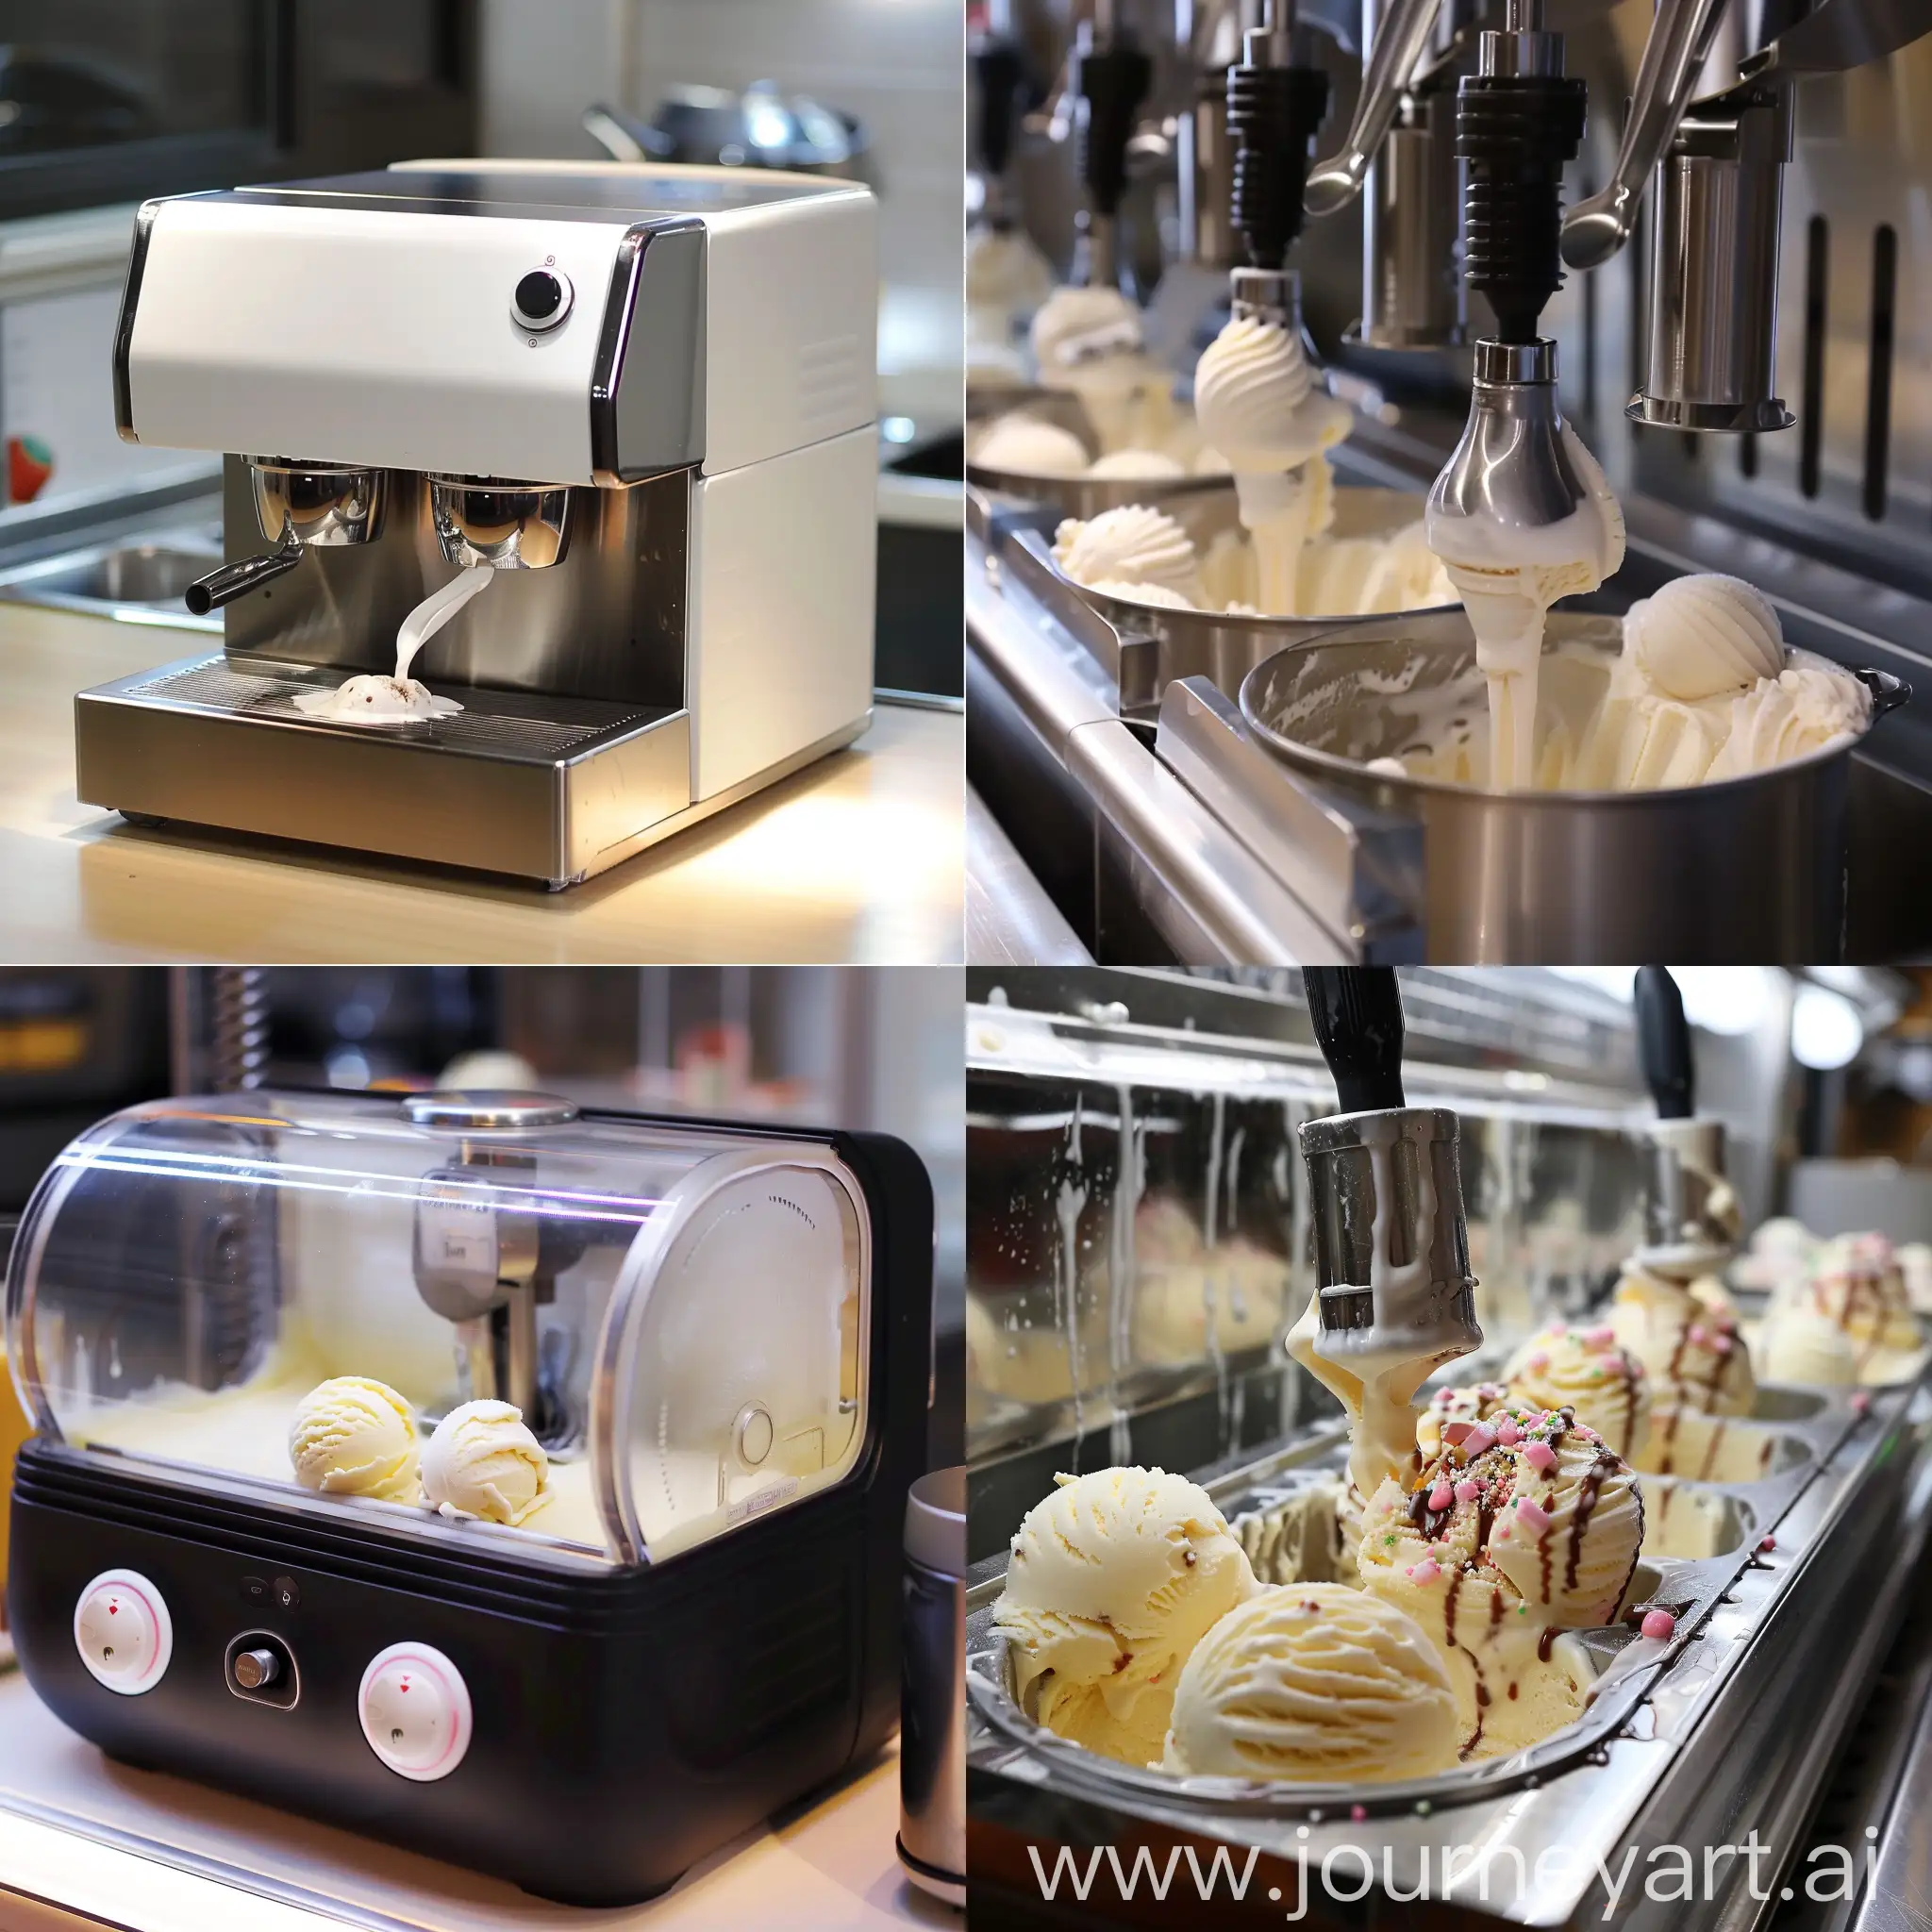 Artificial-Intelligence-Ice-Cream-Maker-in-Action